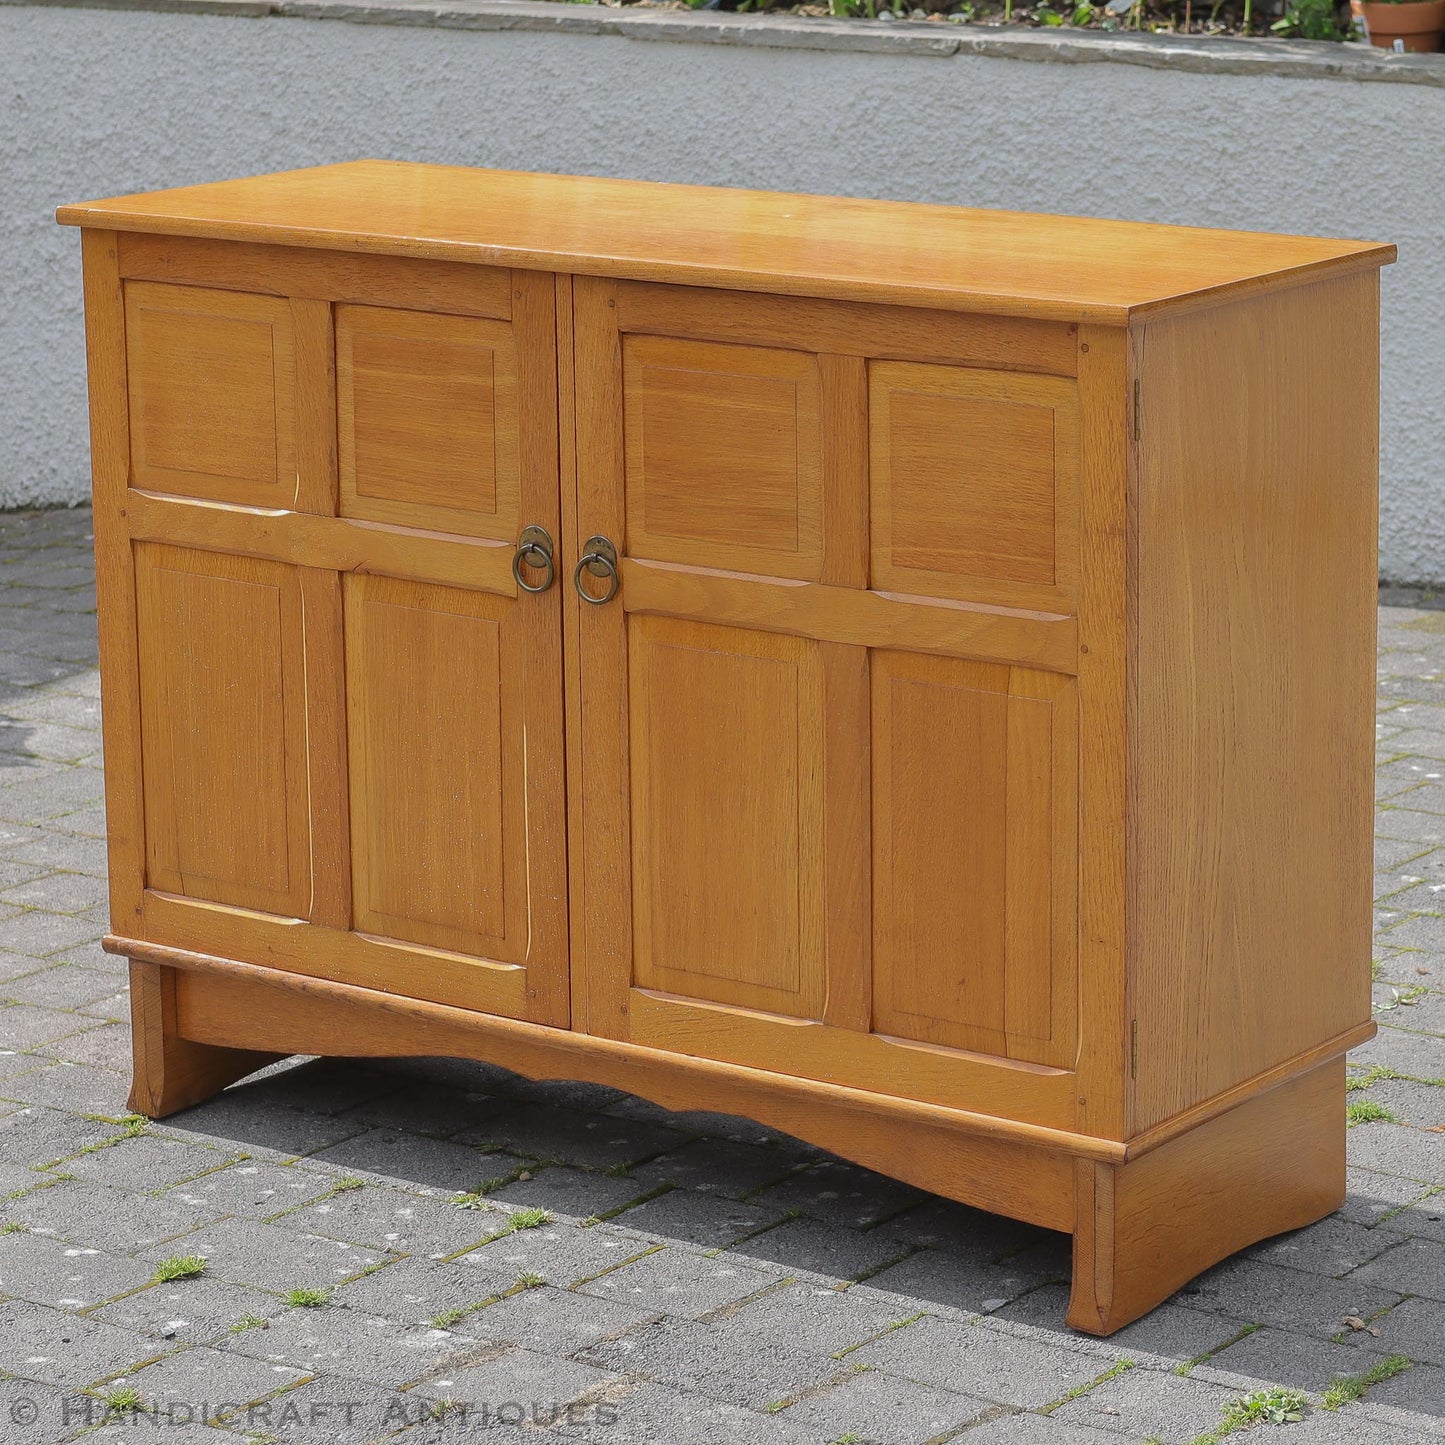 Heal and Co [Ambrose Heal] Arts & Crafts Cotswold School English Oak Sideboard c. 1930.